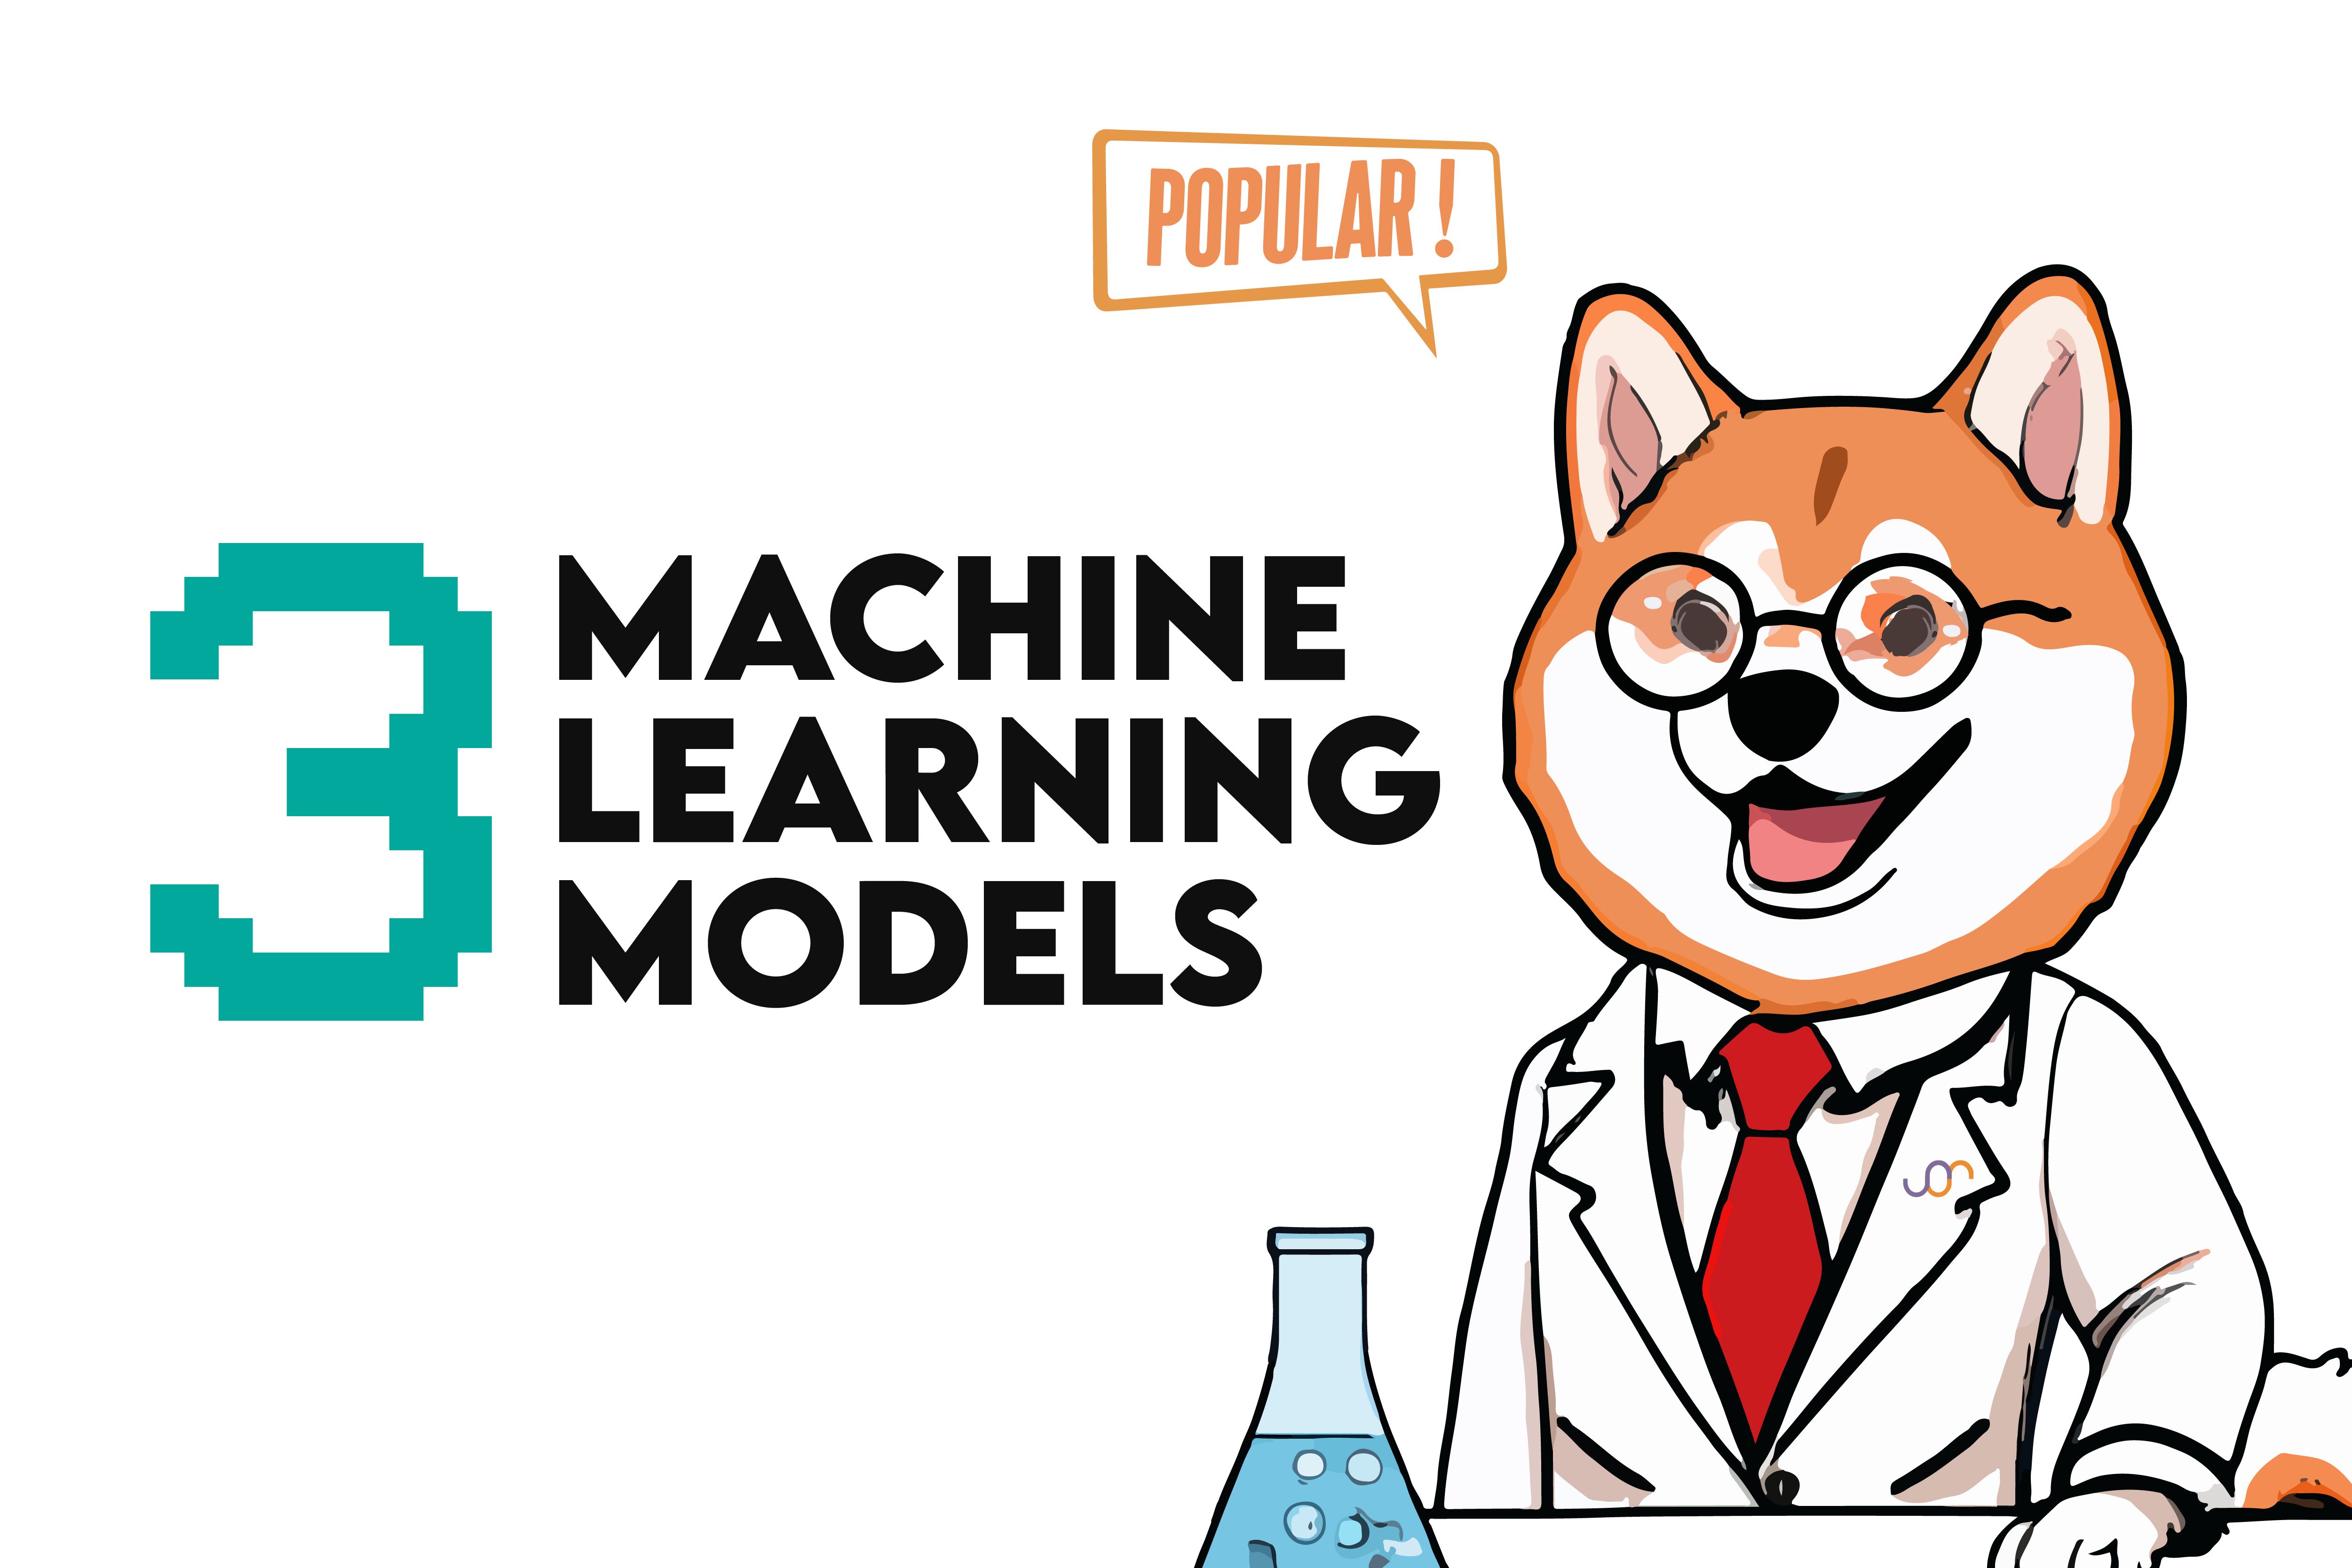 A Comprehensive Overview of 3 Popular Machine Learning Models